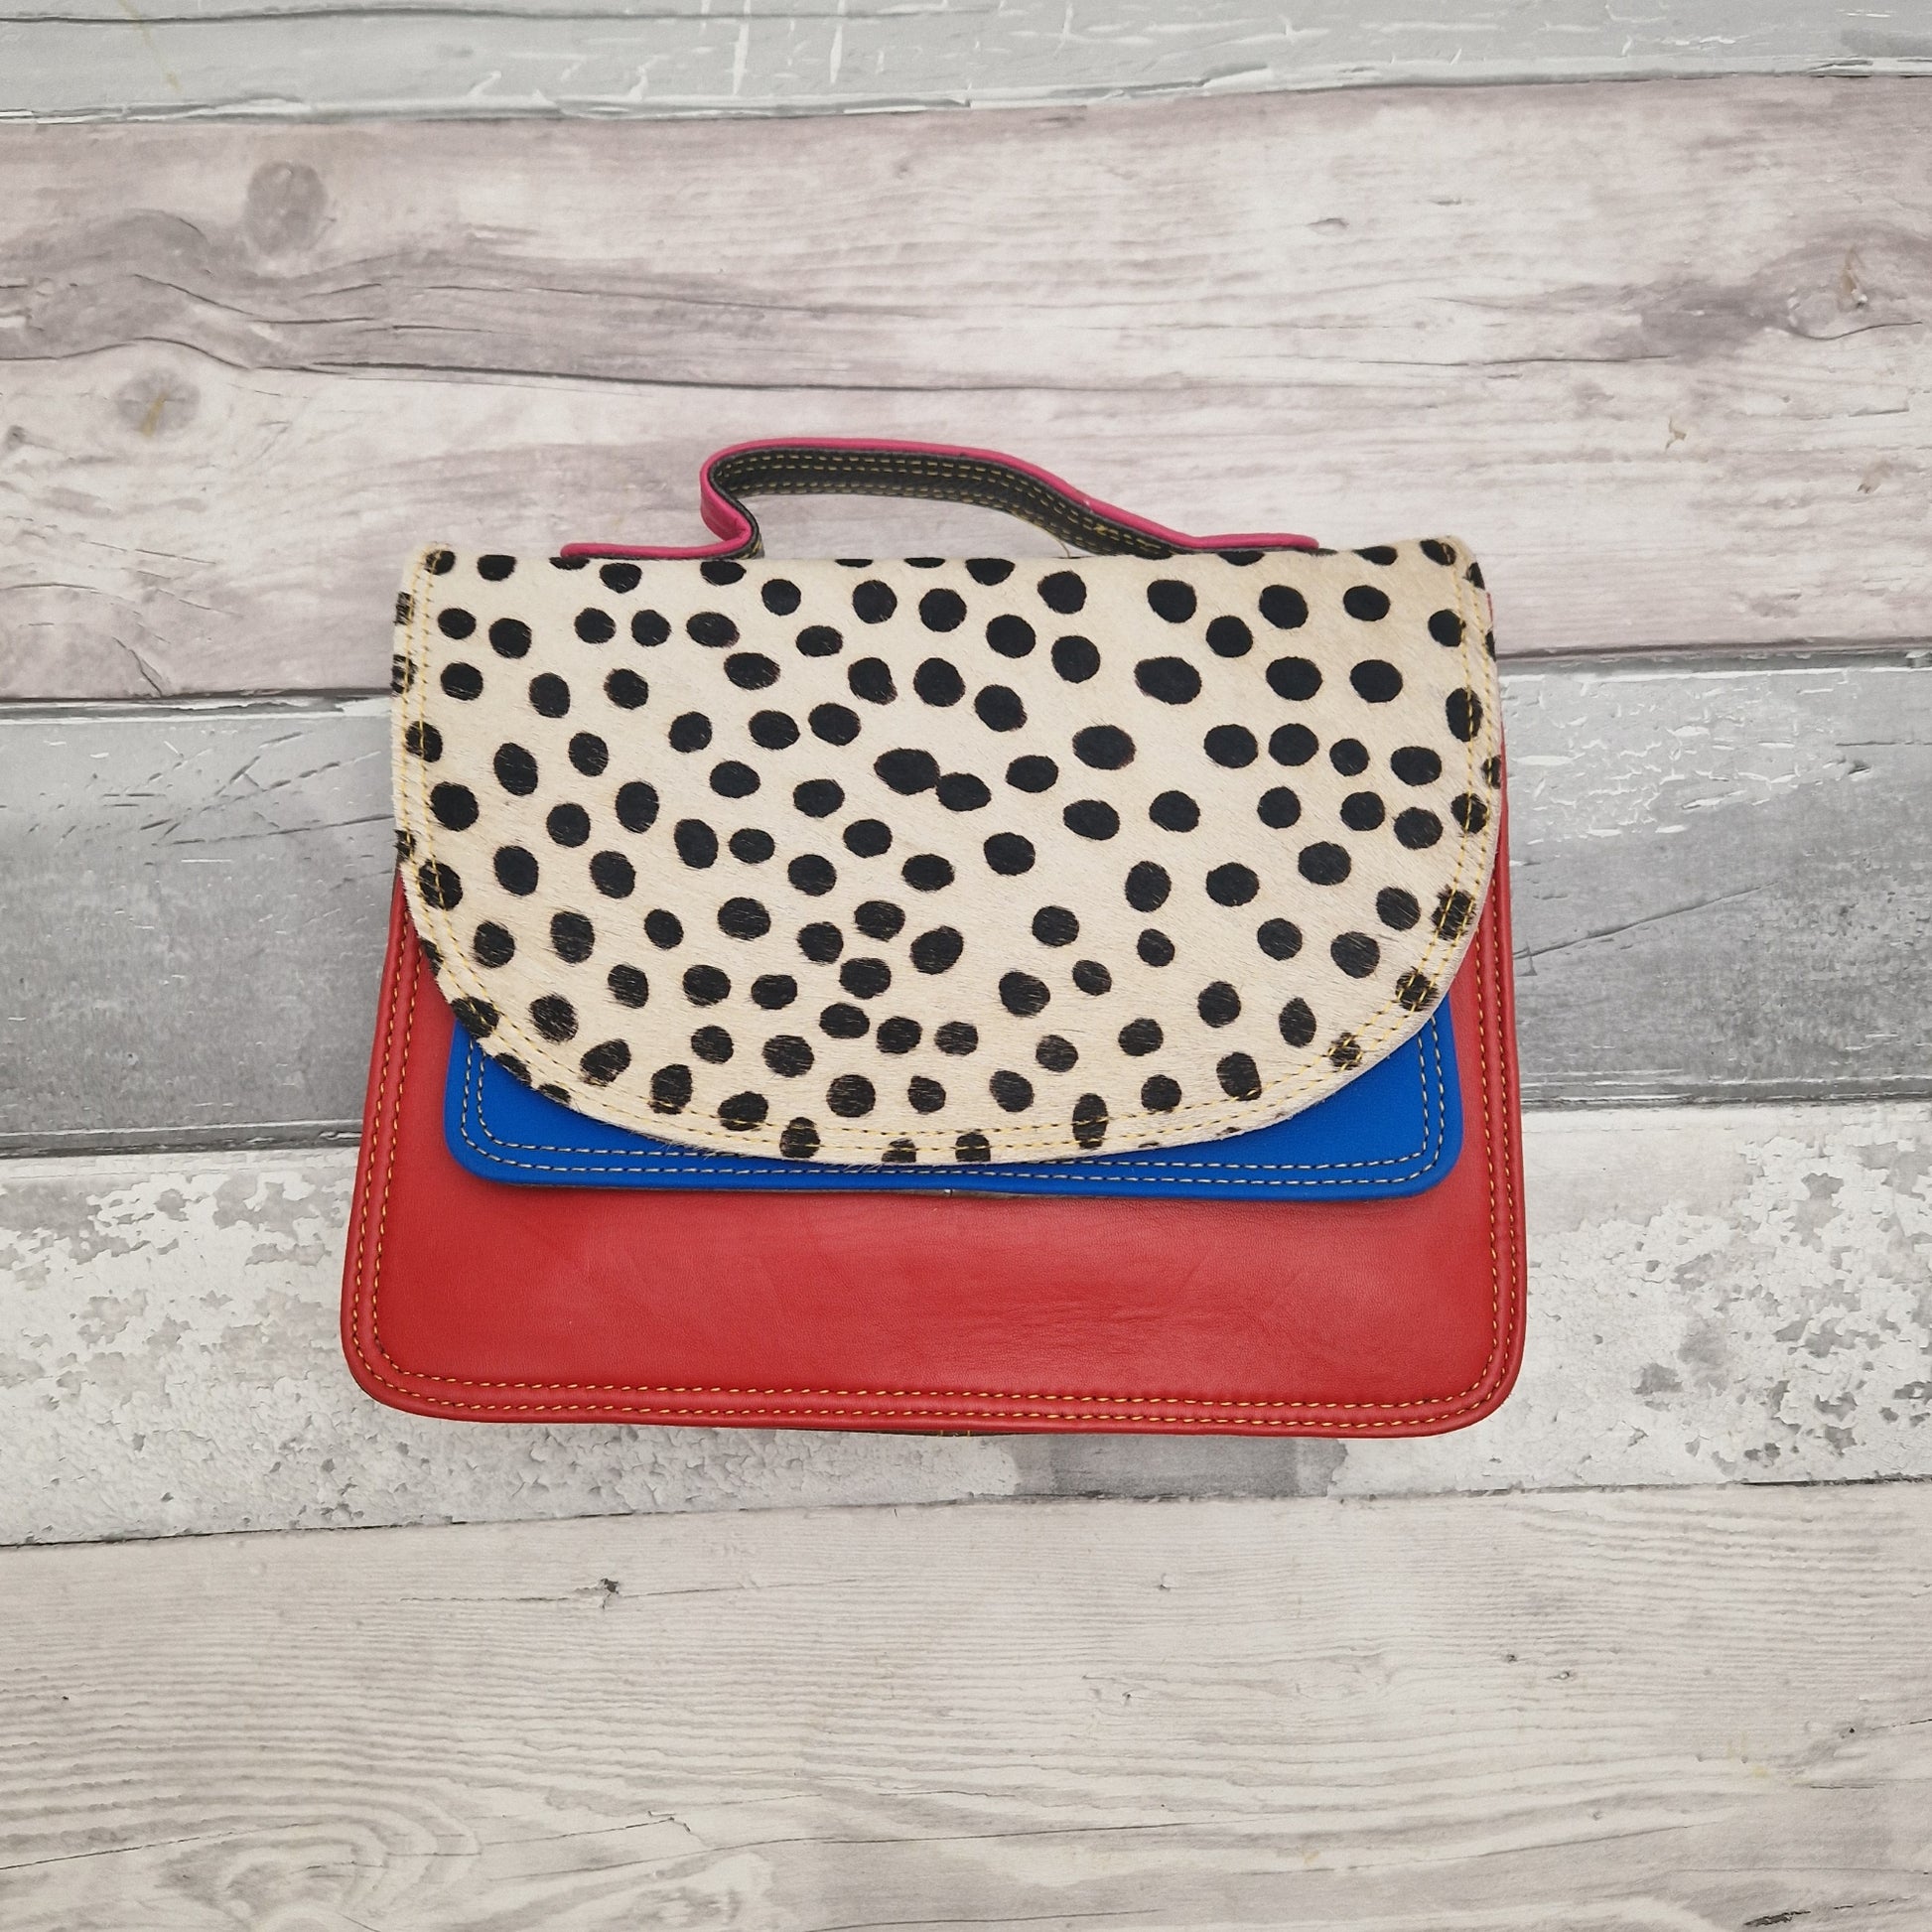 Red leather bag with a textured spot print panel.